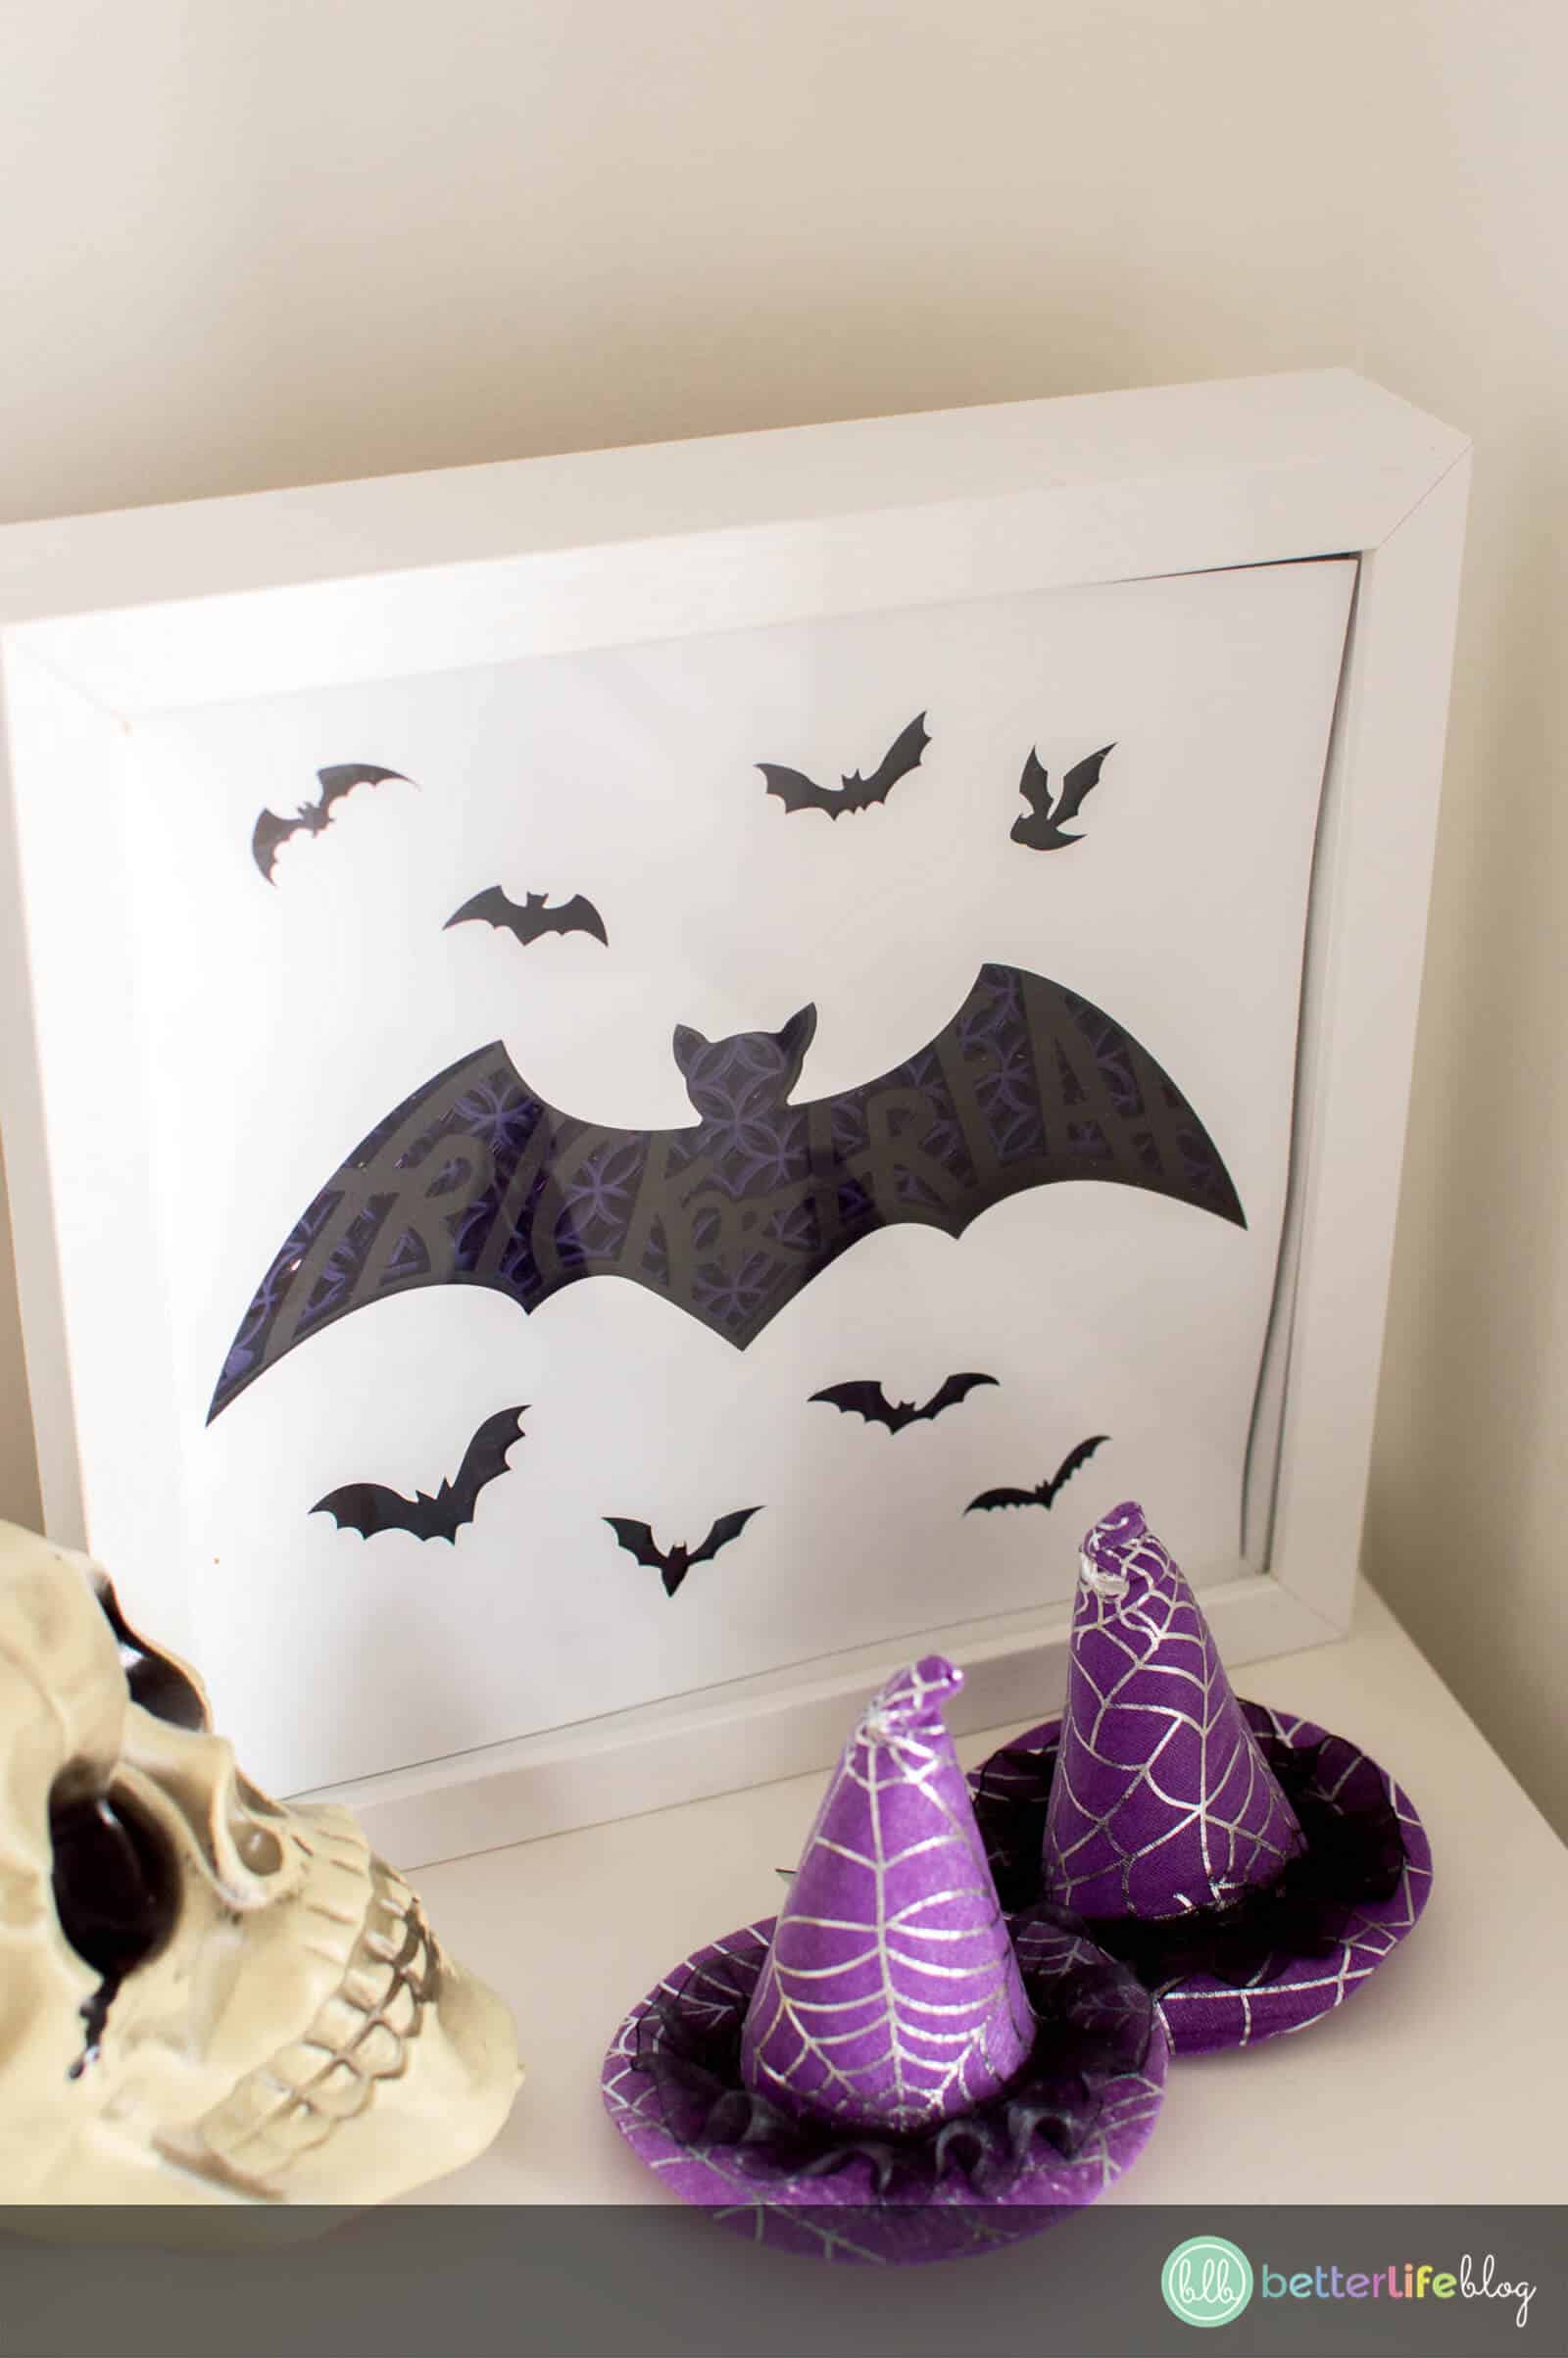 It’s time to get spooky! Learn how to put together your very own Halloween Shadow Box. This beautiful, intricate bat design boasts a “Trick or Treat” trace-out in the middle, making it perfect for light-up shadow box.